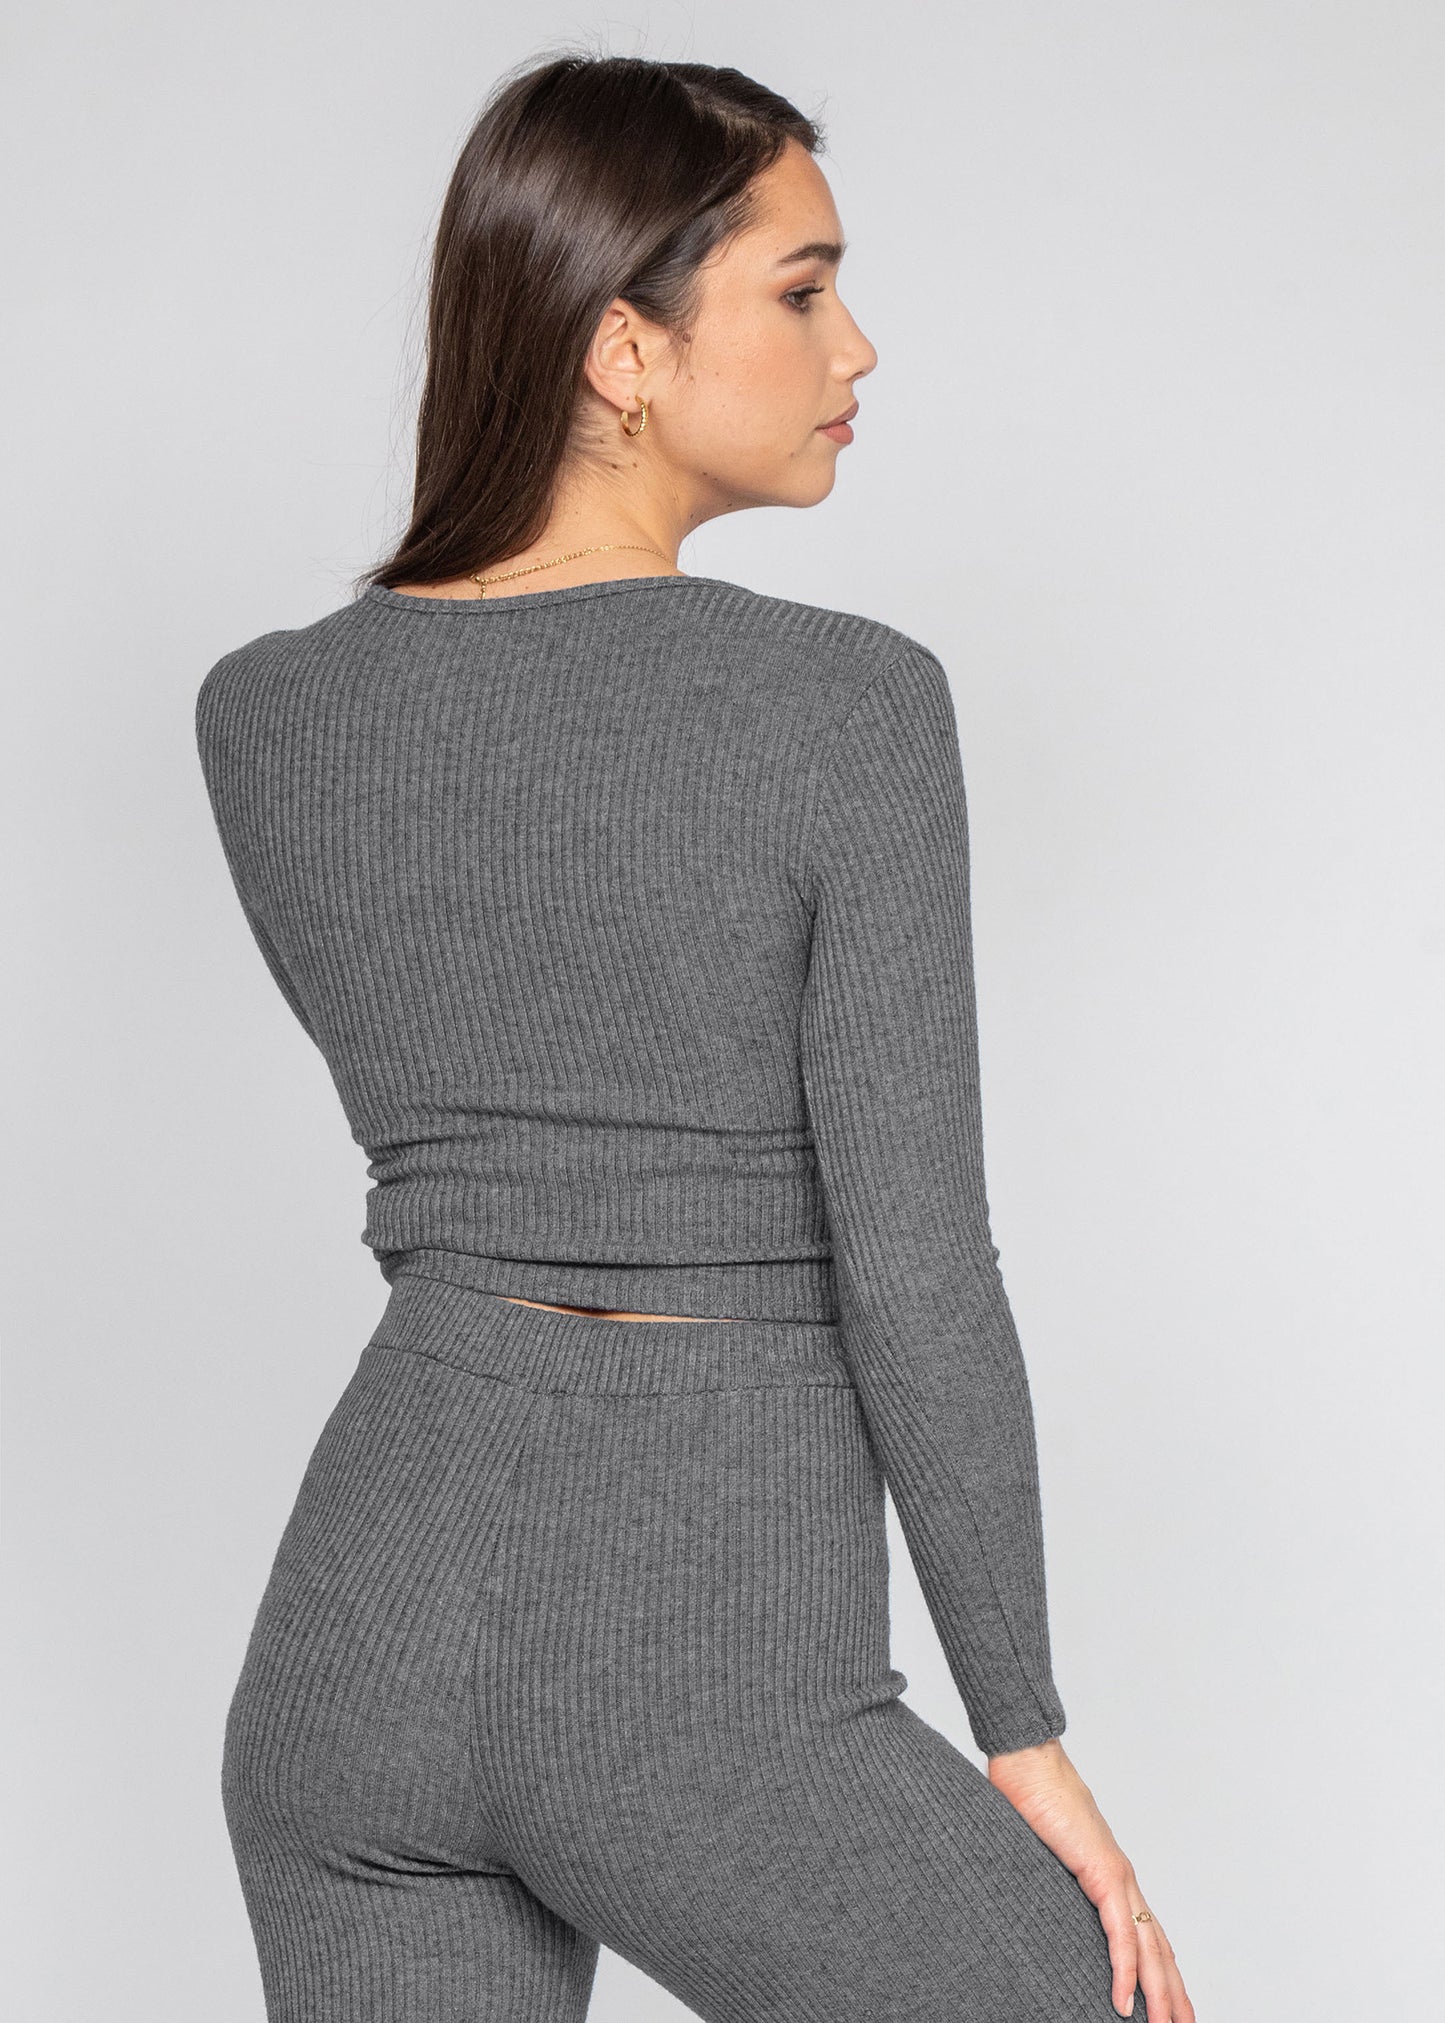 Wrap top with ruched front in grey